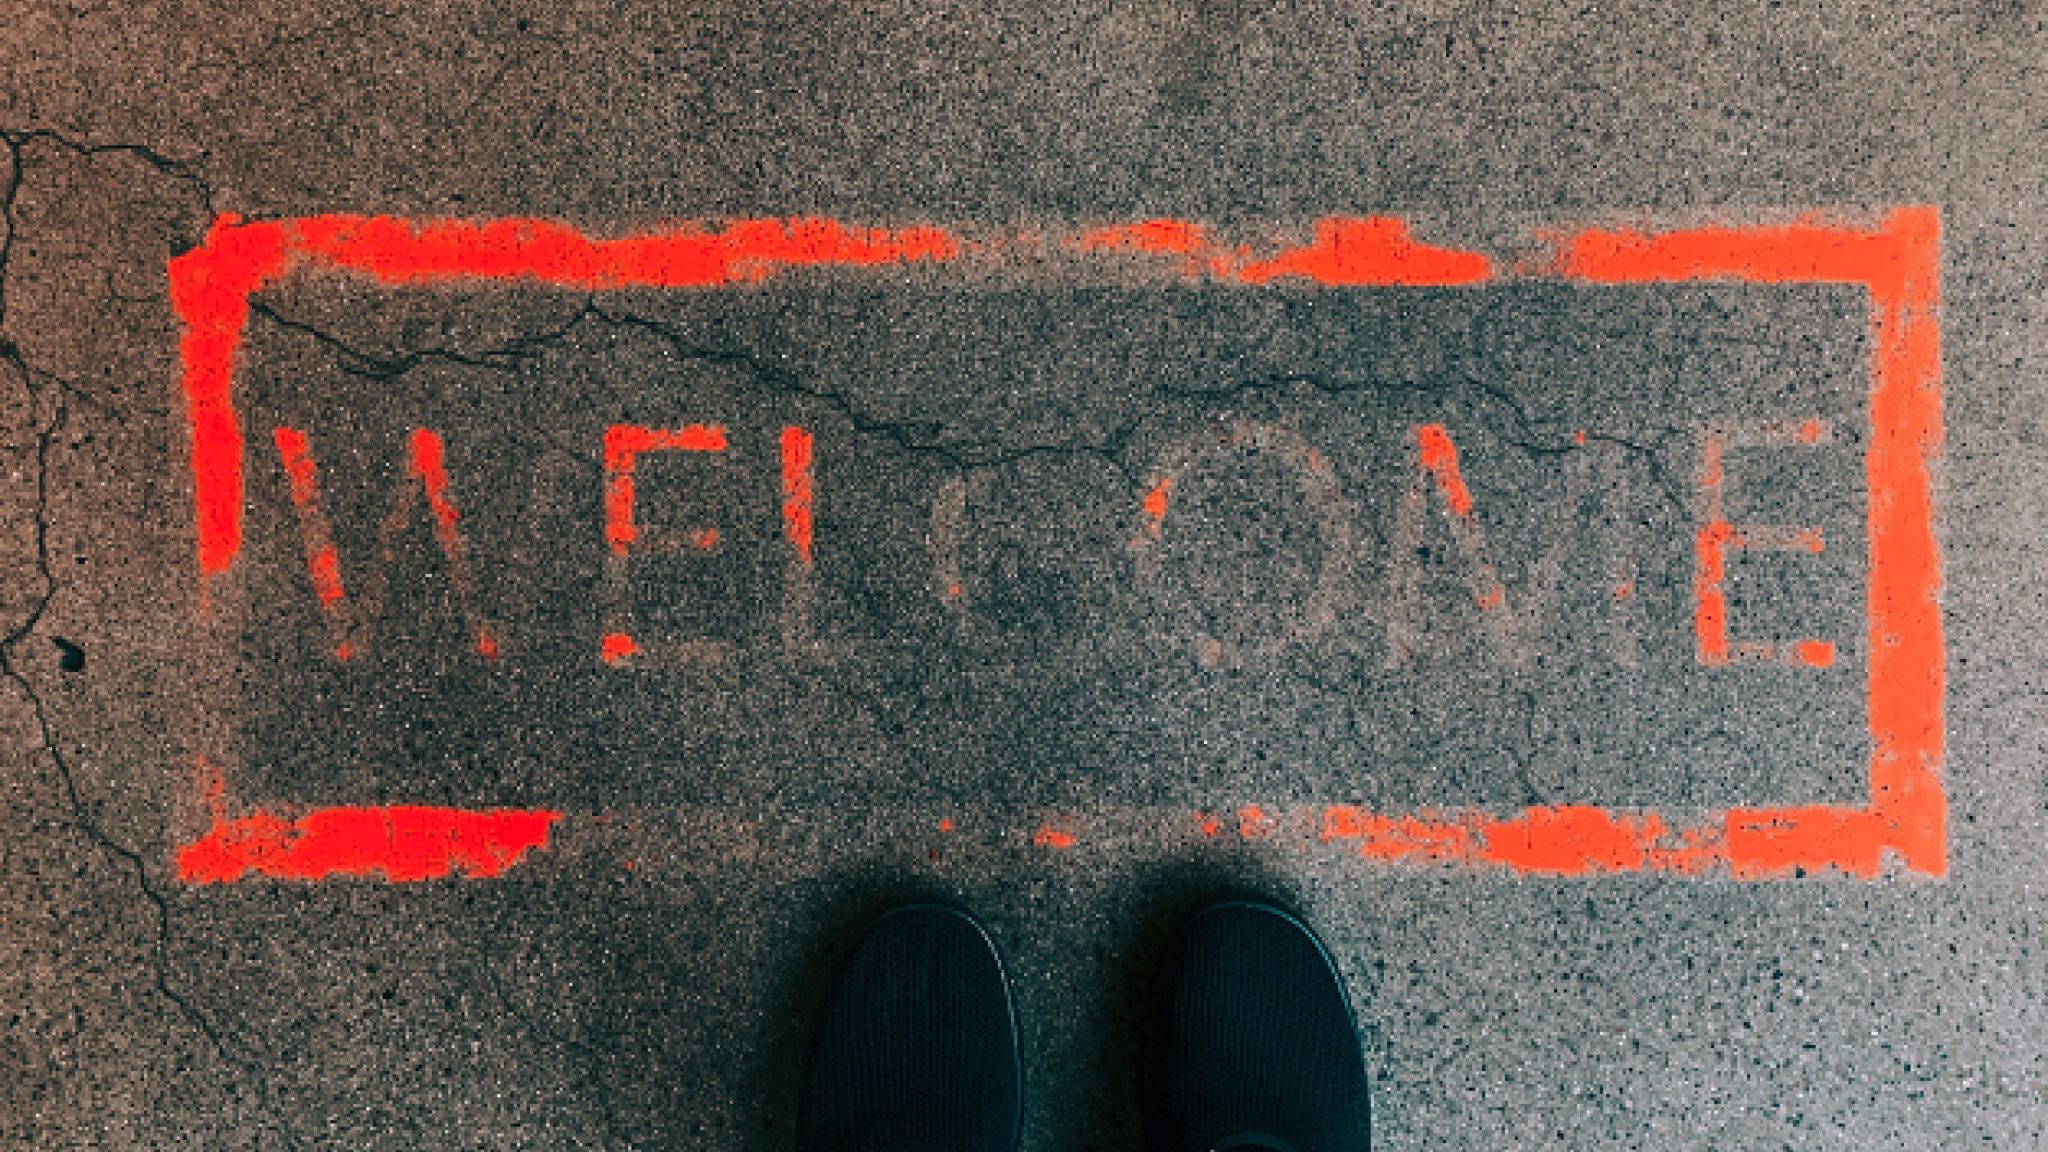 Welcome painted on the floor with red paint and a pair of black shoes standing next to the sign